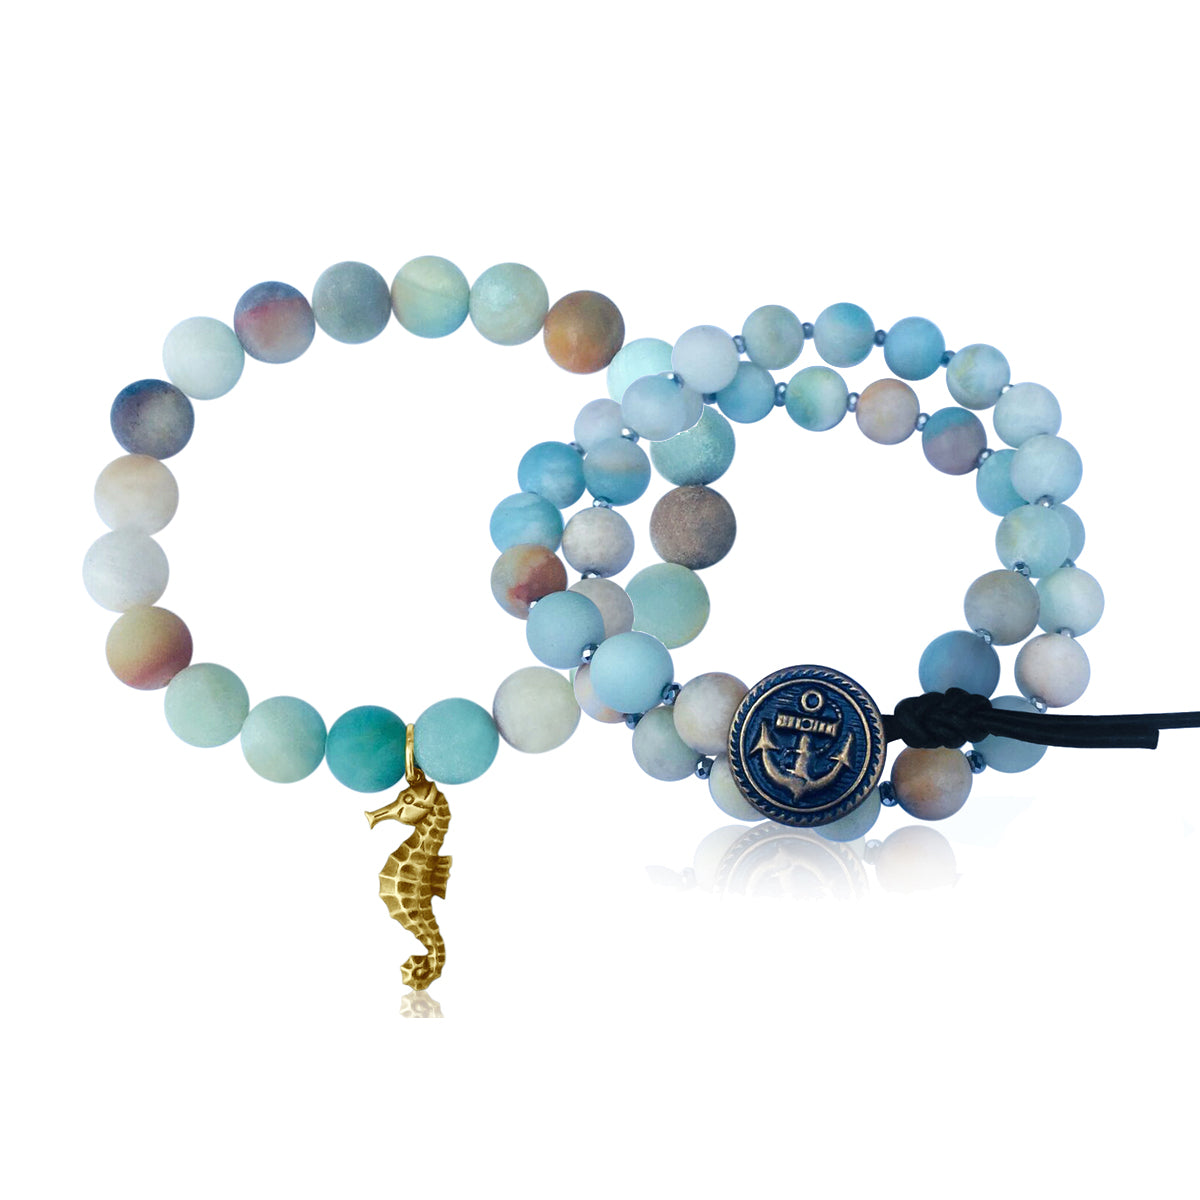 Amazonite Wrap Bracelet with Anchor to Help Keep a Clear Mind - Combo with a Magical Seahorse